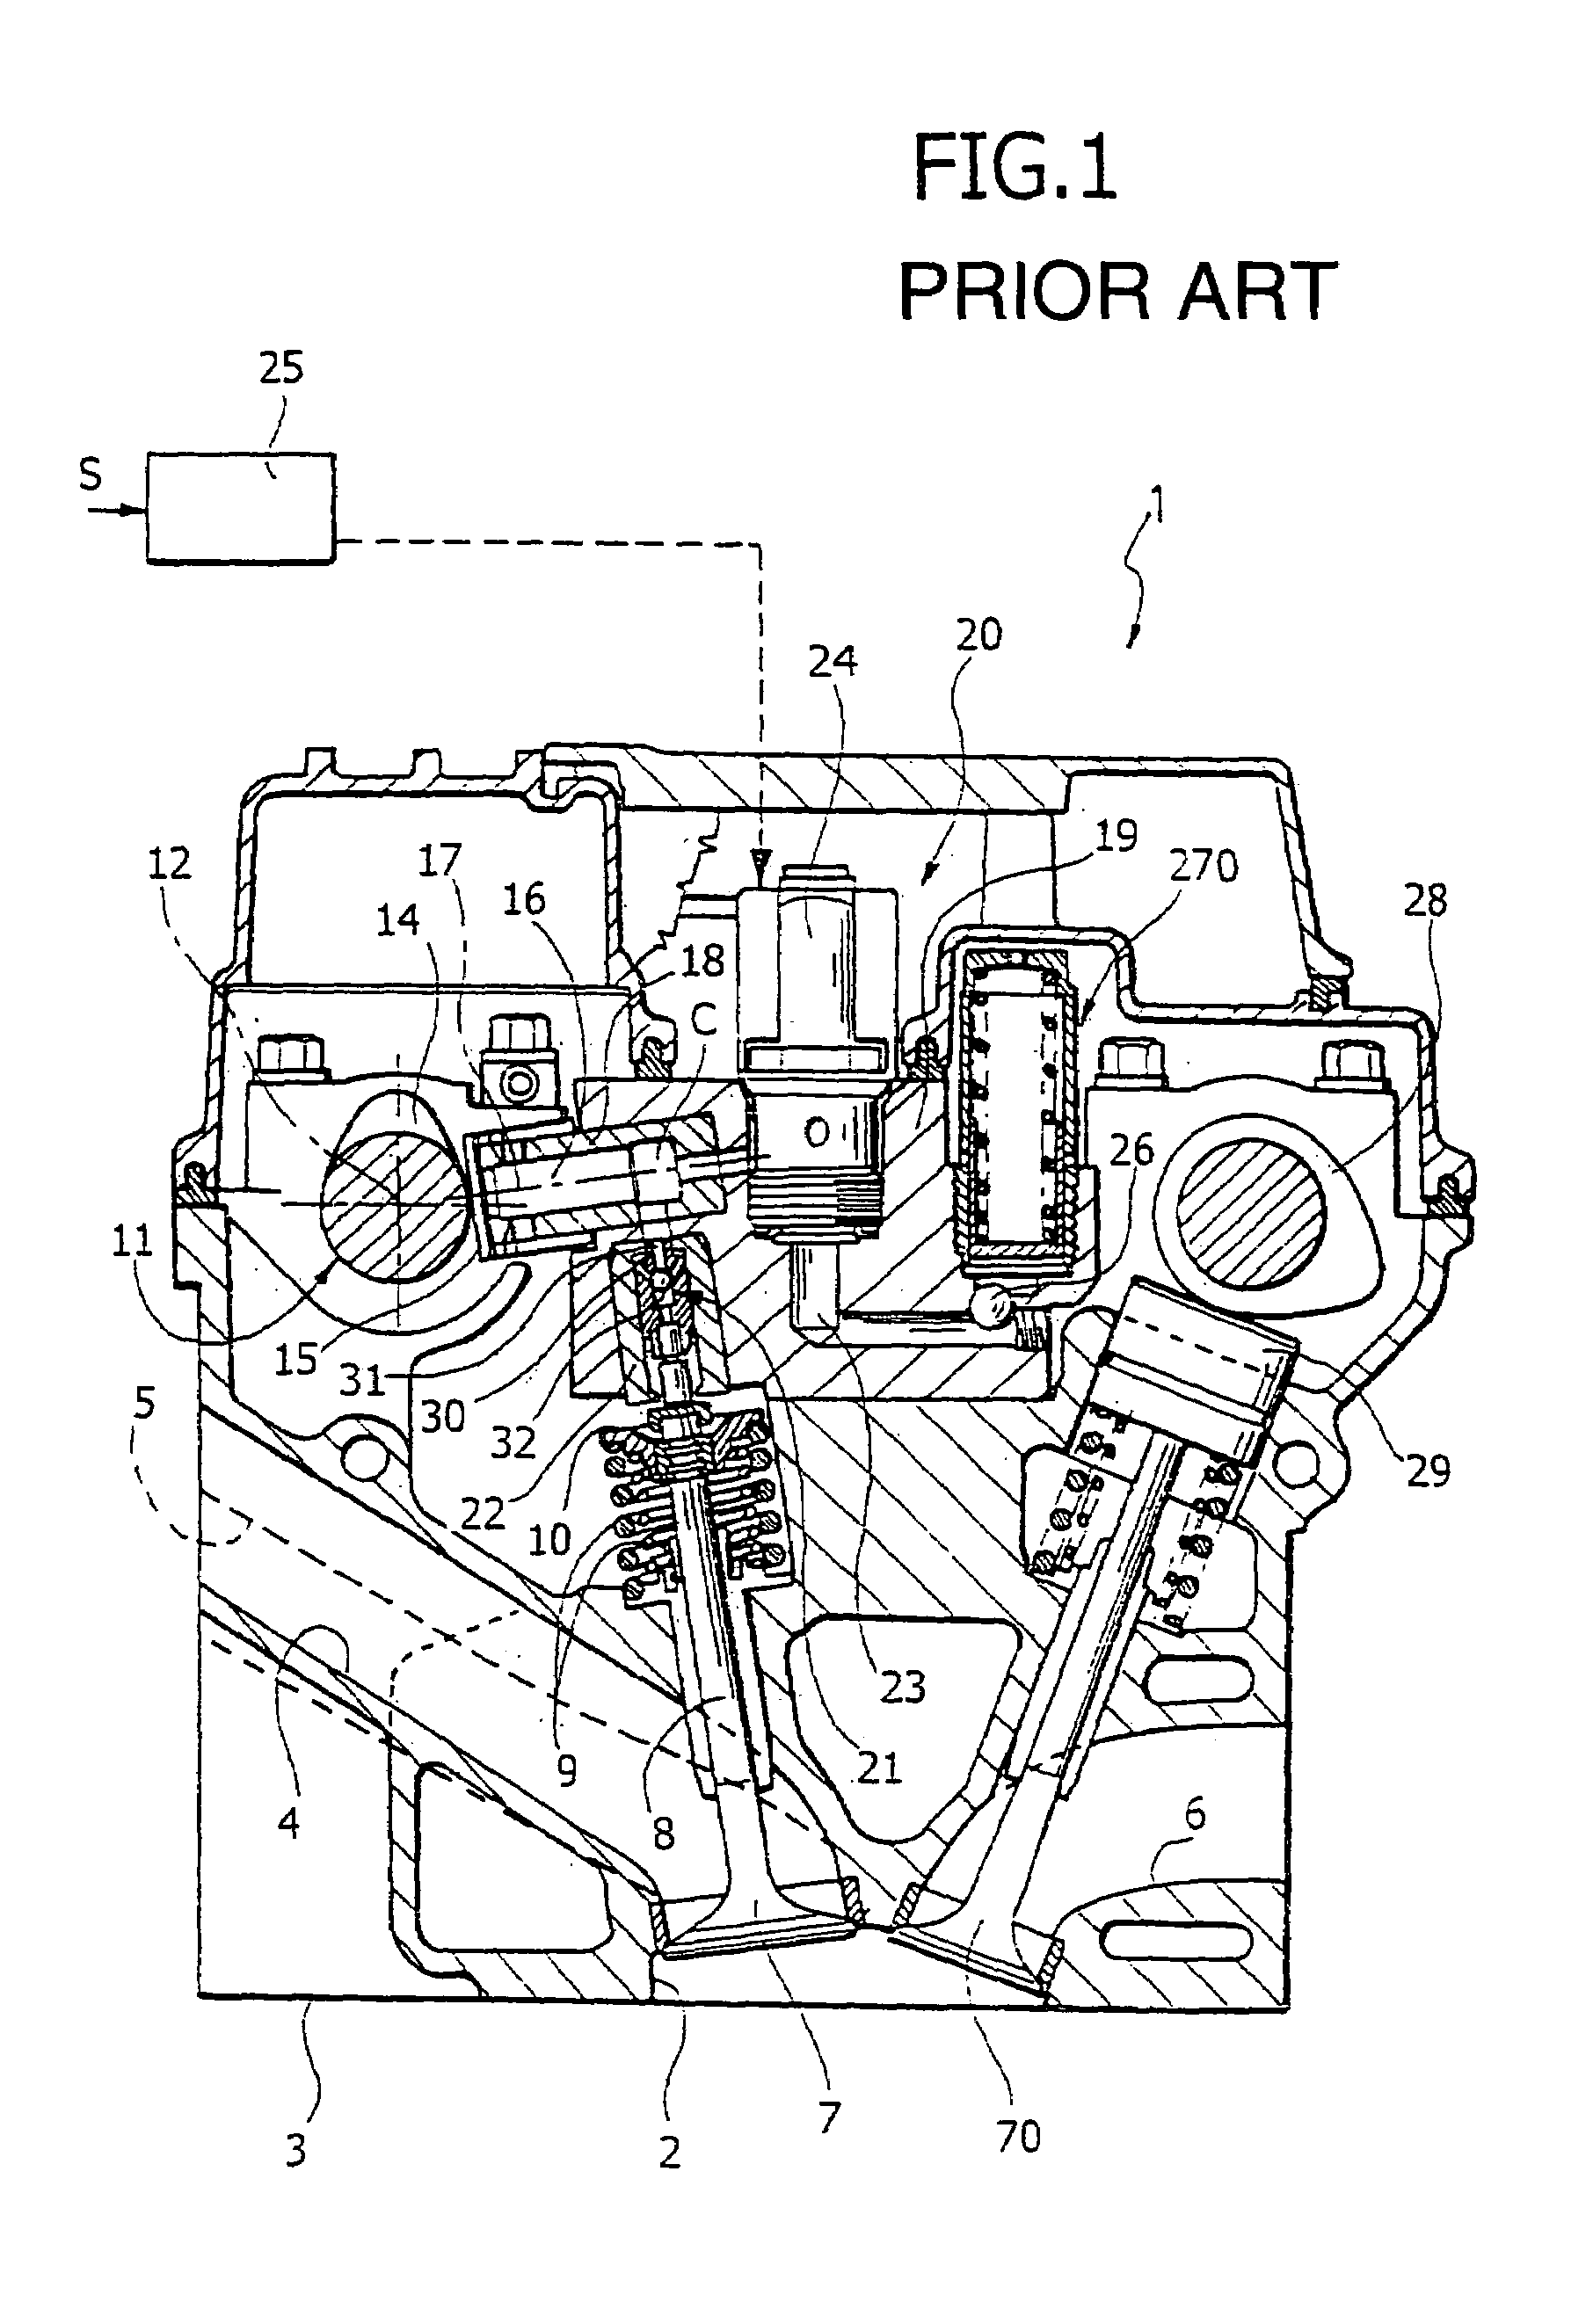 Internal combustion engine having valves with variable actuation each provided with a hydraulic tappet at the outside of the associated actuating unit